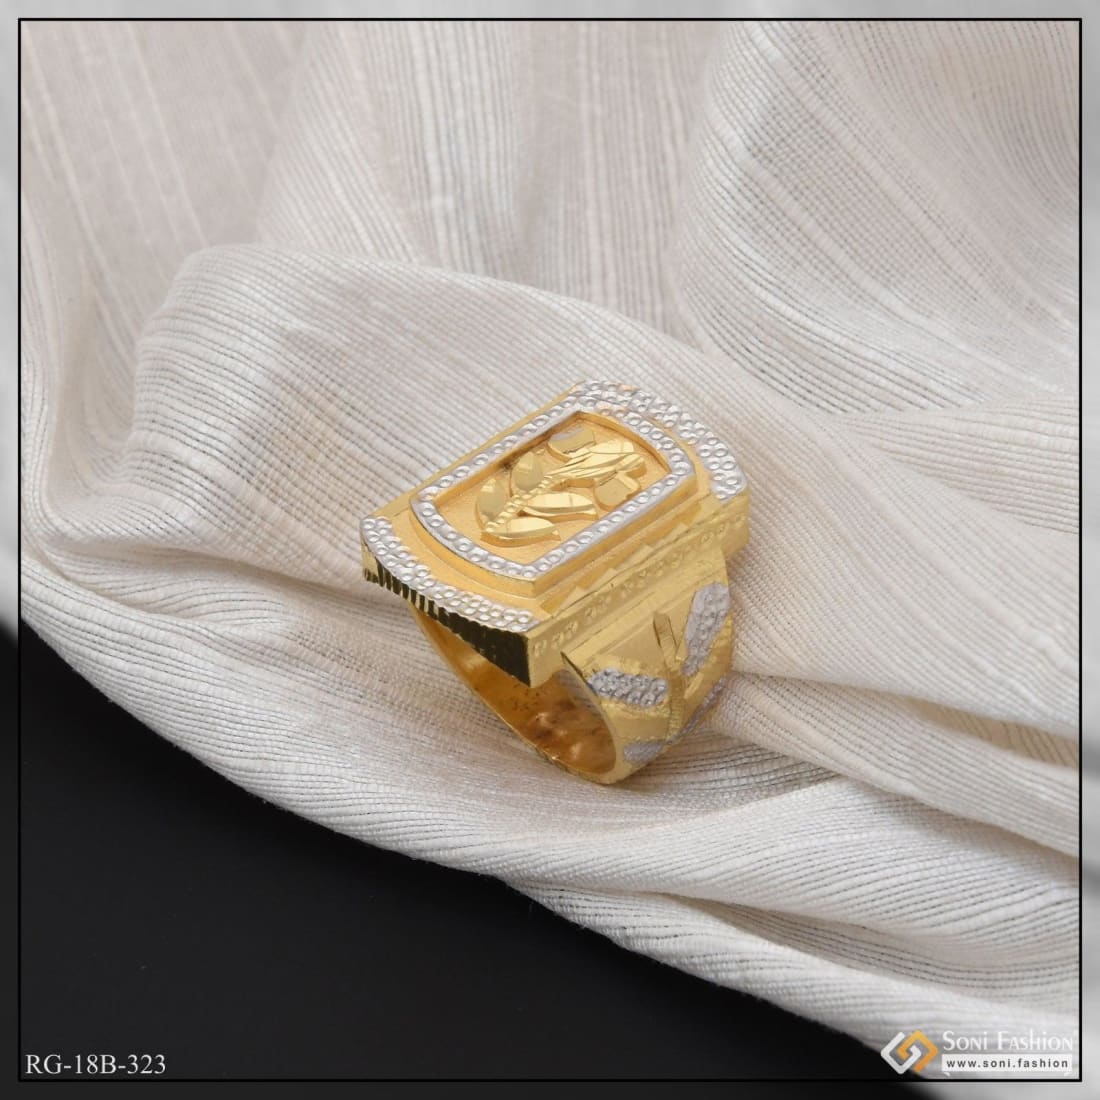 latest ring with price | 3 gm gold rings | rings designs gold | gold ring  for women | gold anguhti | Ring designs, Gold rings, Gold